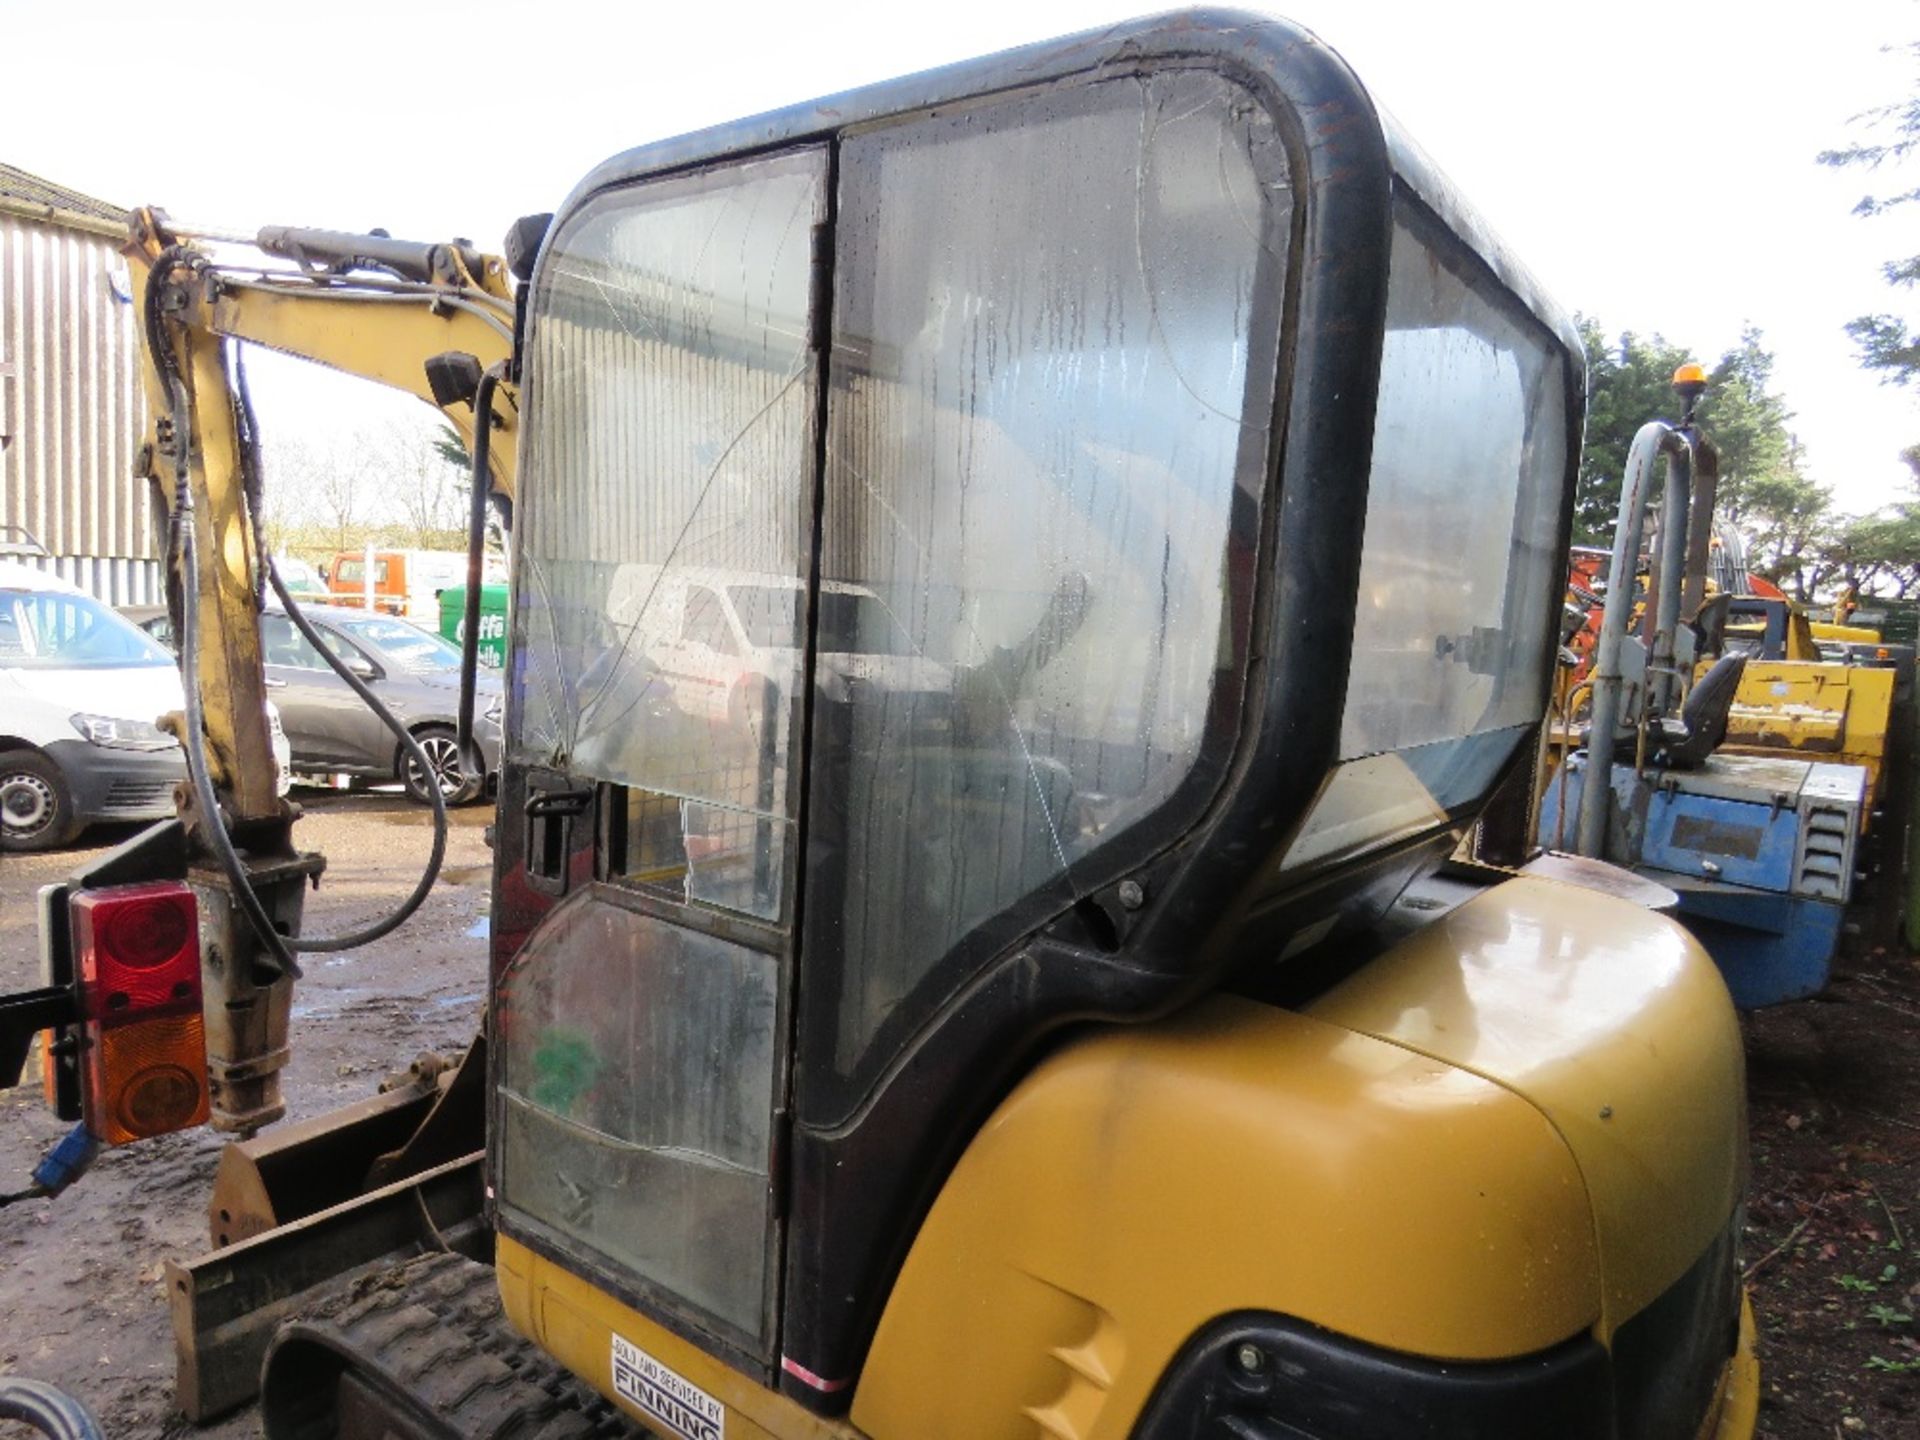 CATERPILLAR 302.5 MINI EXCAVATOR WITH 2 BUCKETS AND A CAT BREAKER. YEAR 2001. 1222 REC HRS (UNVERIFI - Image 9 of 11